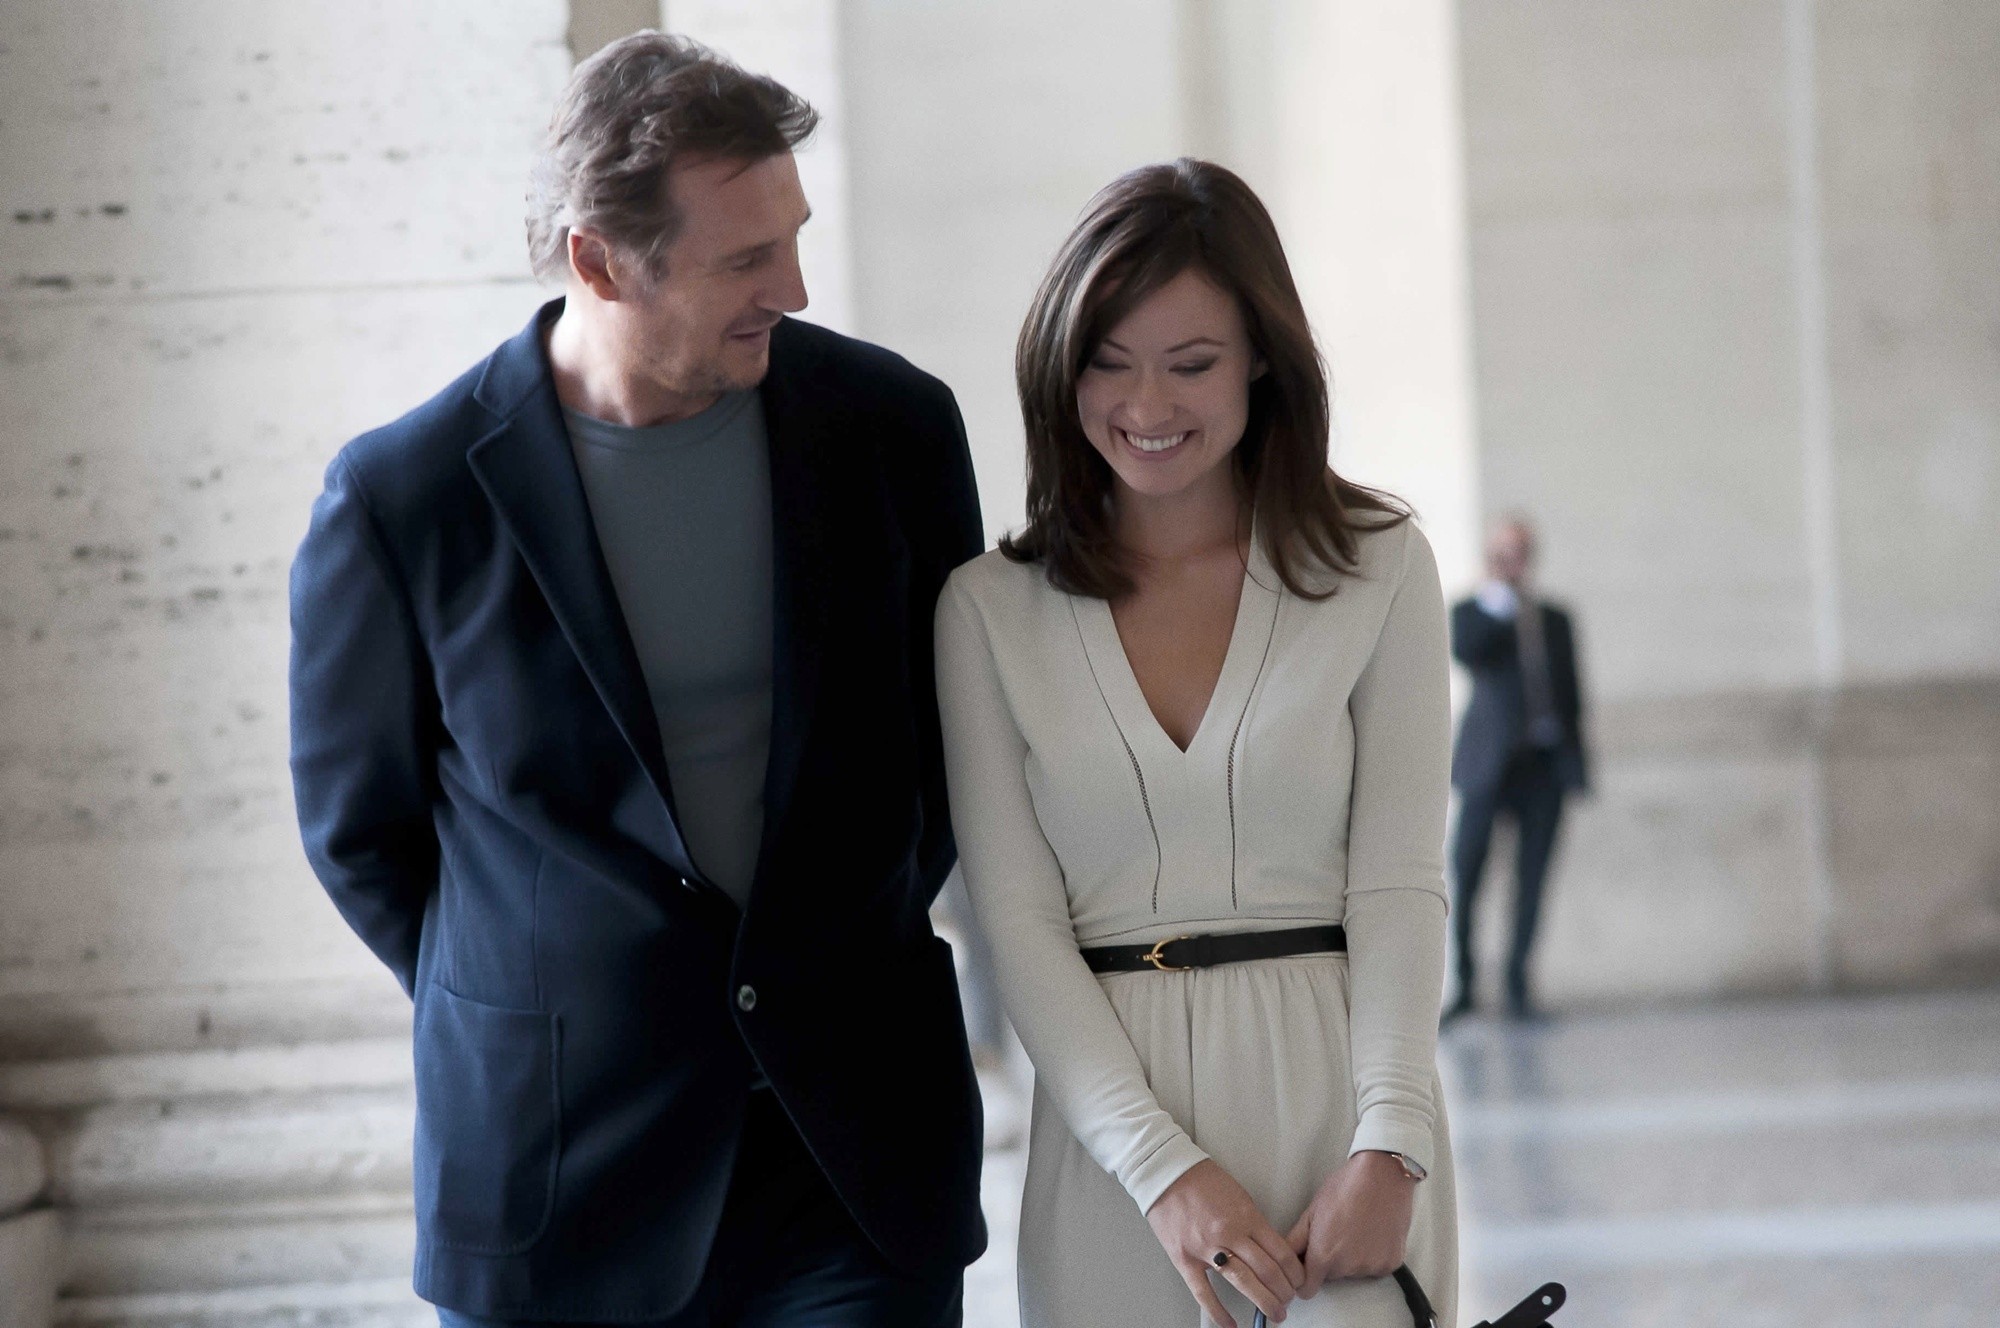 Liam Neeson stars as Michael and Olivia Wilde stars as Anna in Sony Pictures Classics' Third Person (2014)